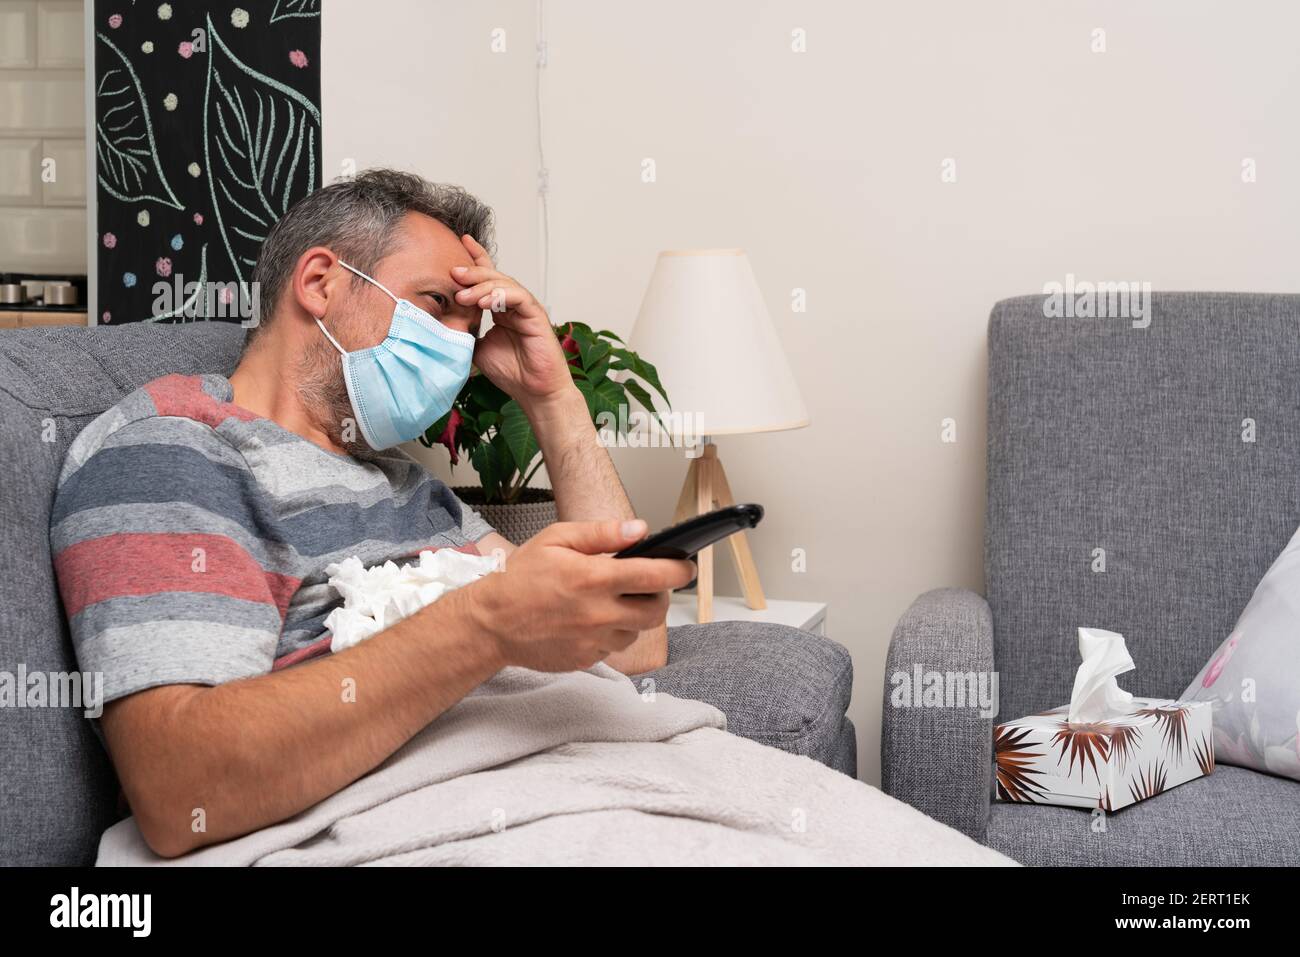 Sick adult man having migraine or high fever sitting on home sofa holding tv remote control zapping wearing surgical or medical mask to prevent sars c Stock Photo